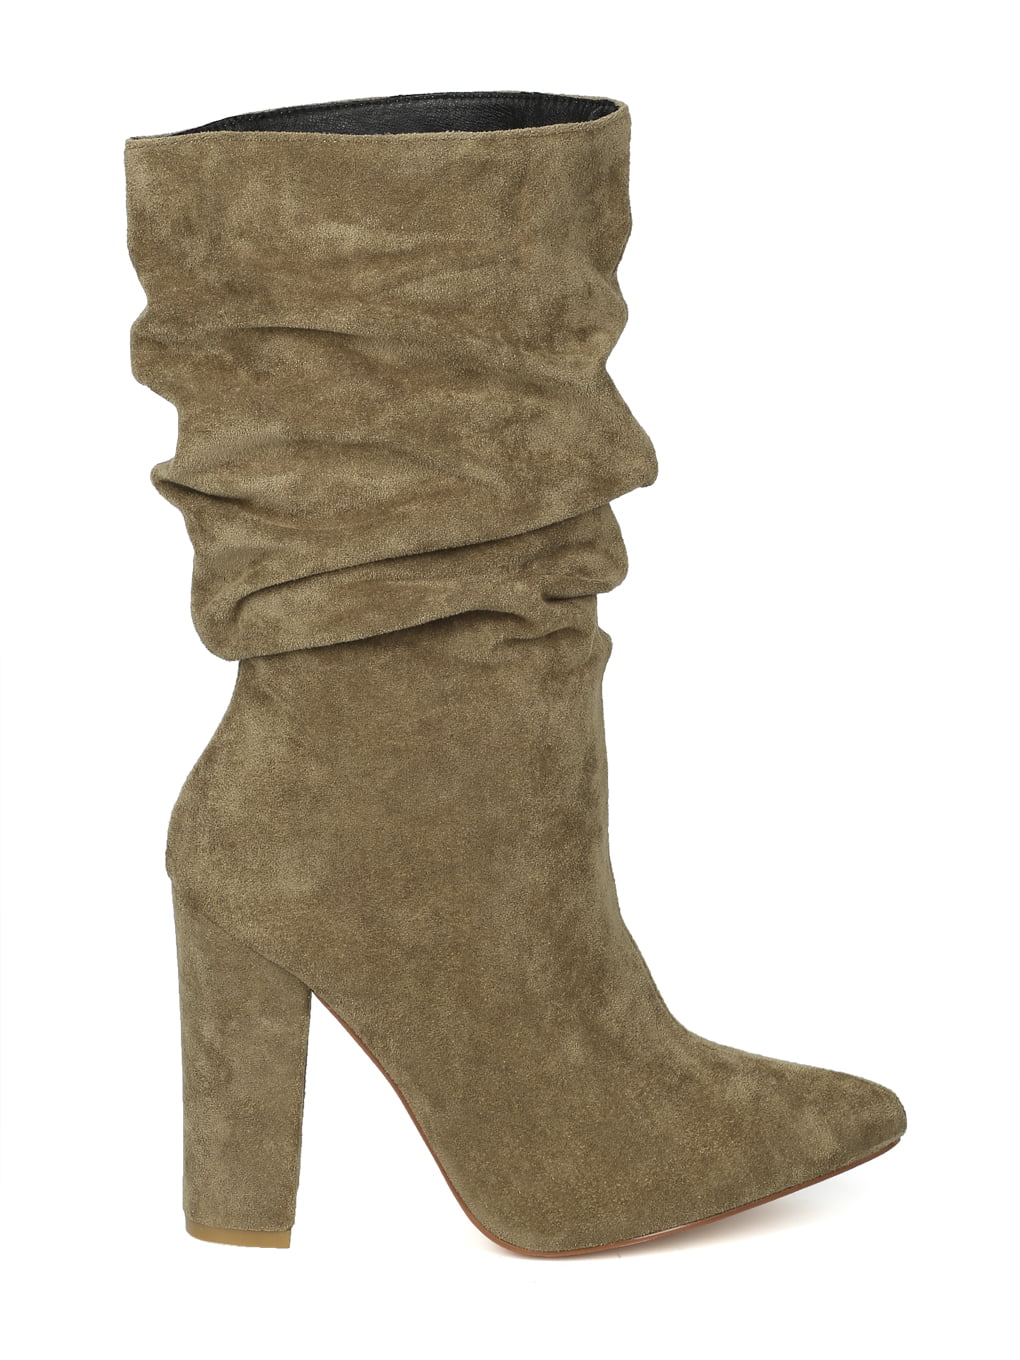 New Women Faux Suede Pointy Toe Slouchy 